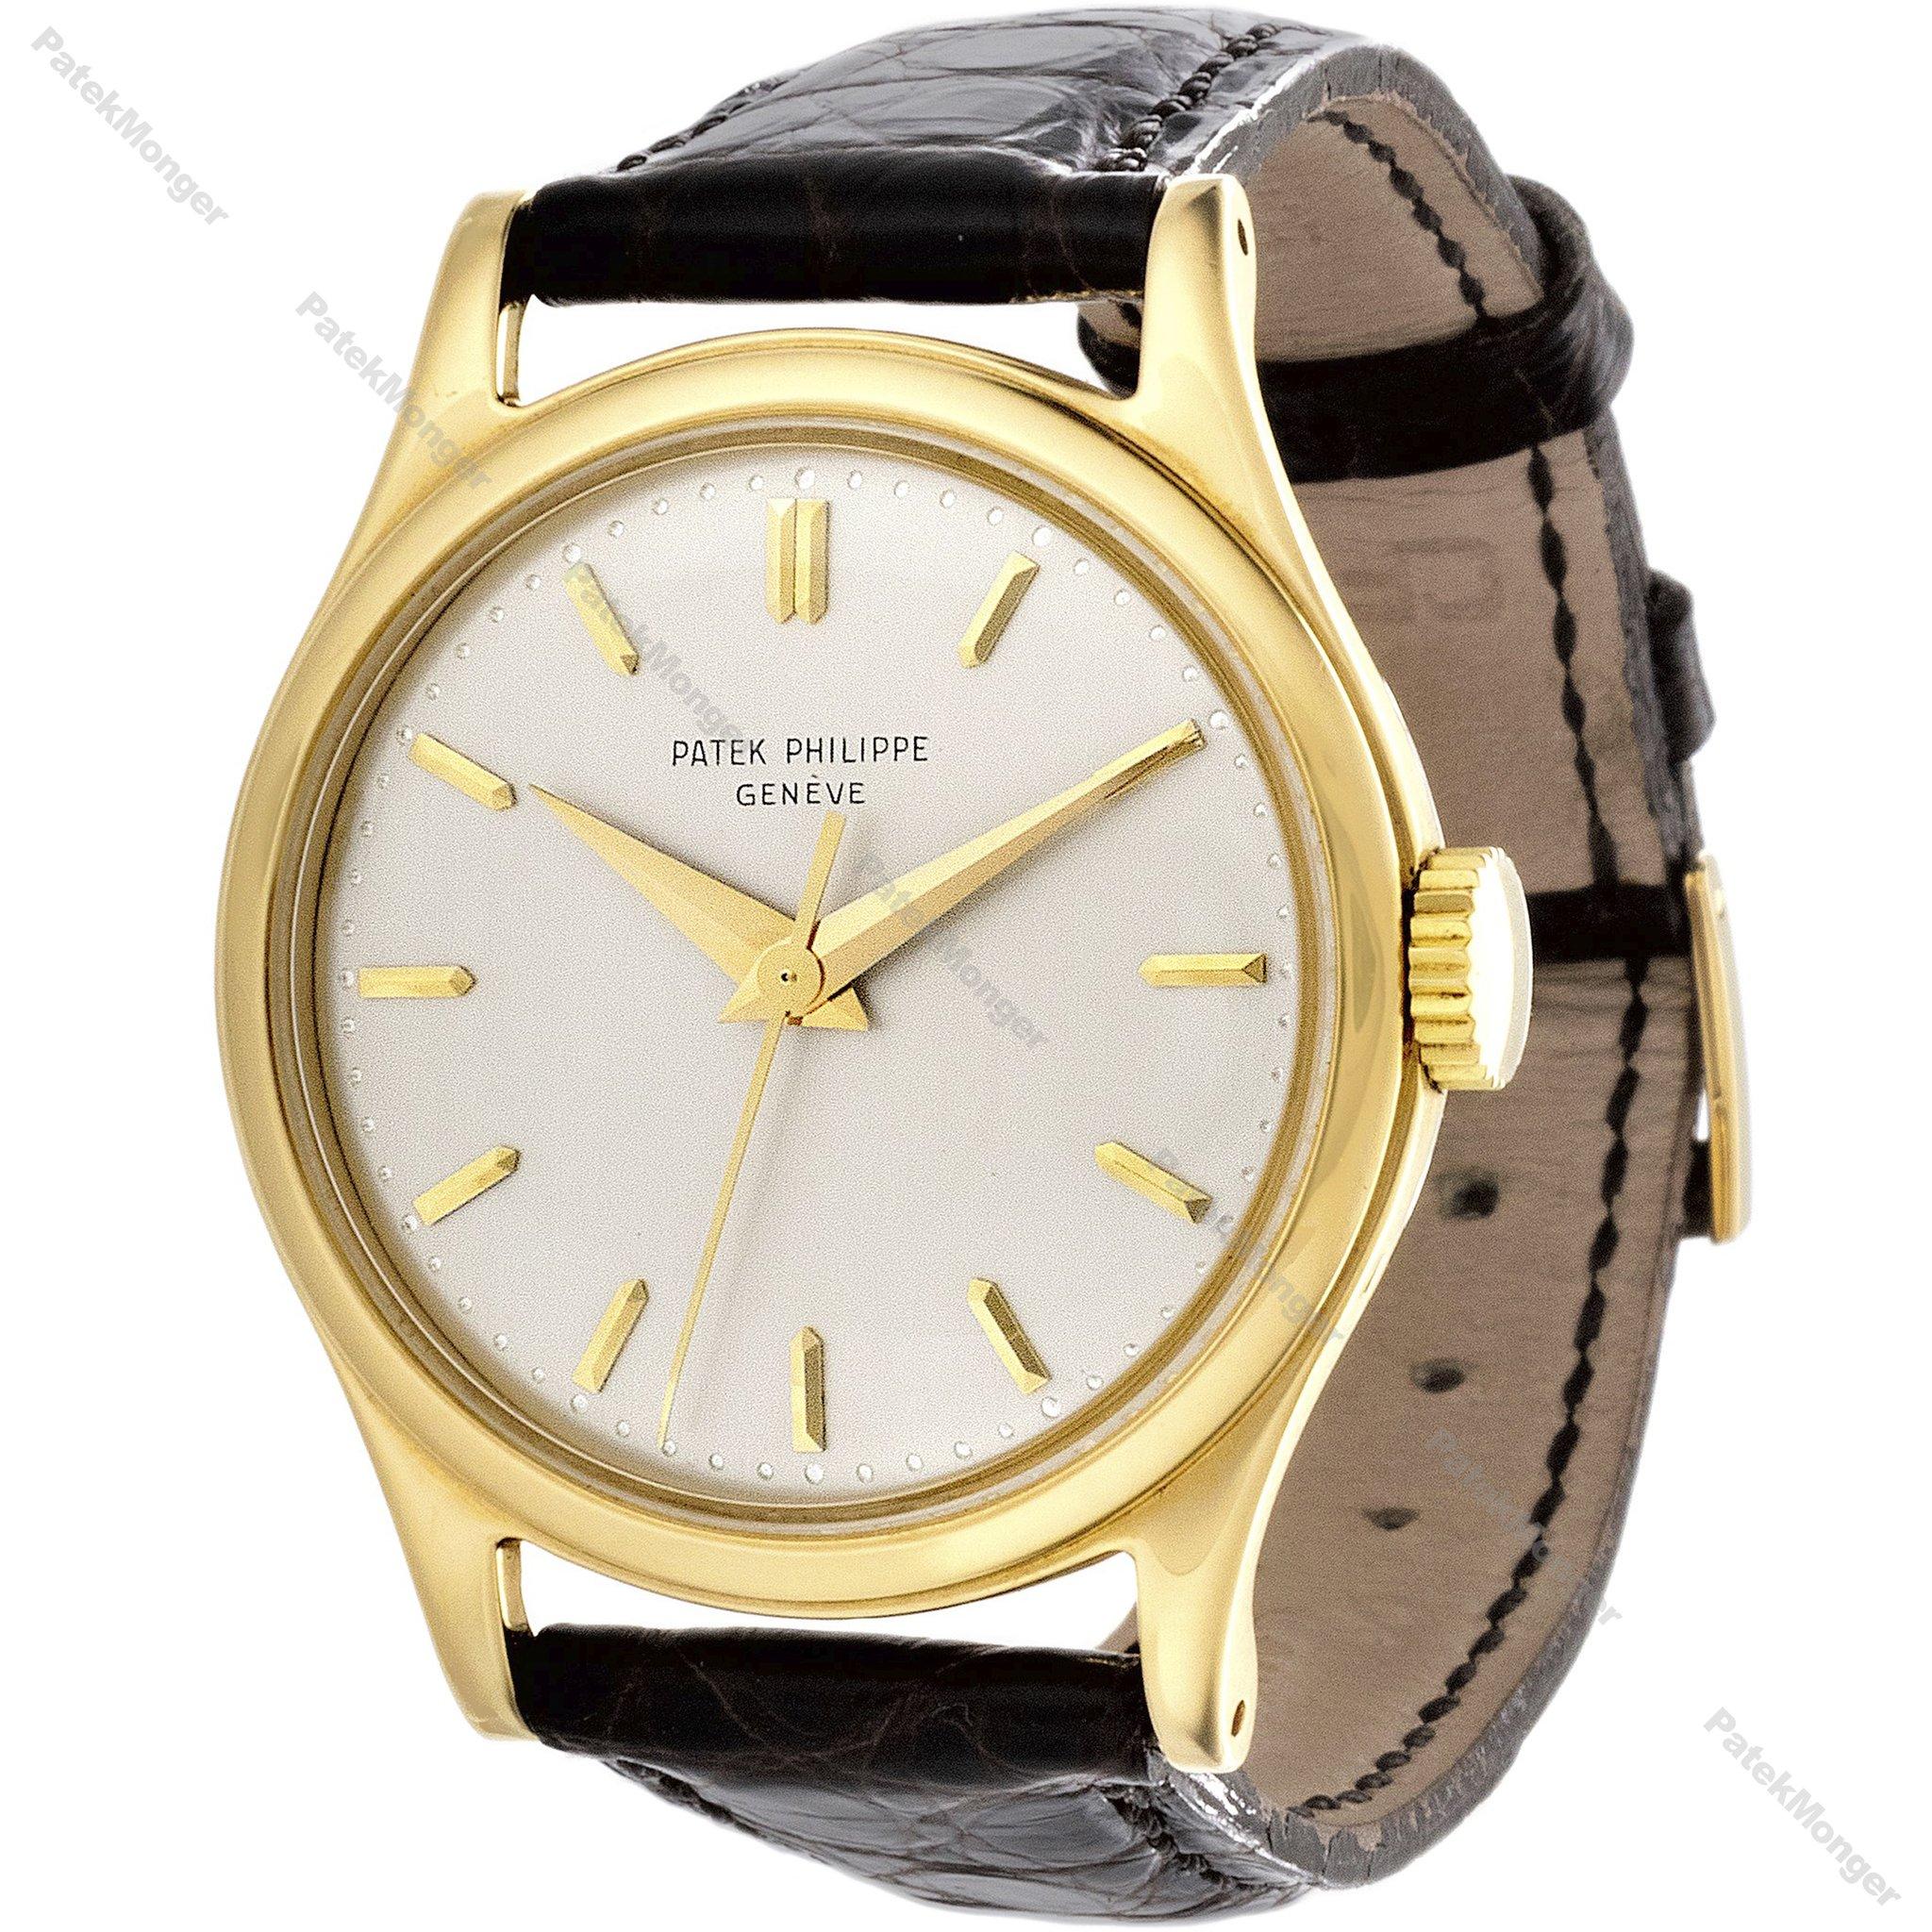 Introduction:
This 2508J vintage Patek Philippe watch features original factory dial with applied gold markers, screw back case, sweep seconds hand and  Patek alligator strap with original 18K yellow gold Patek buckle. 

Date & Paperwork: 
The watch